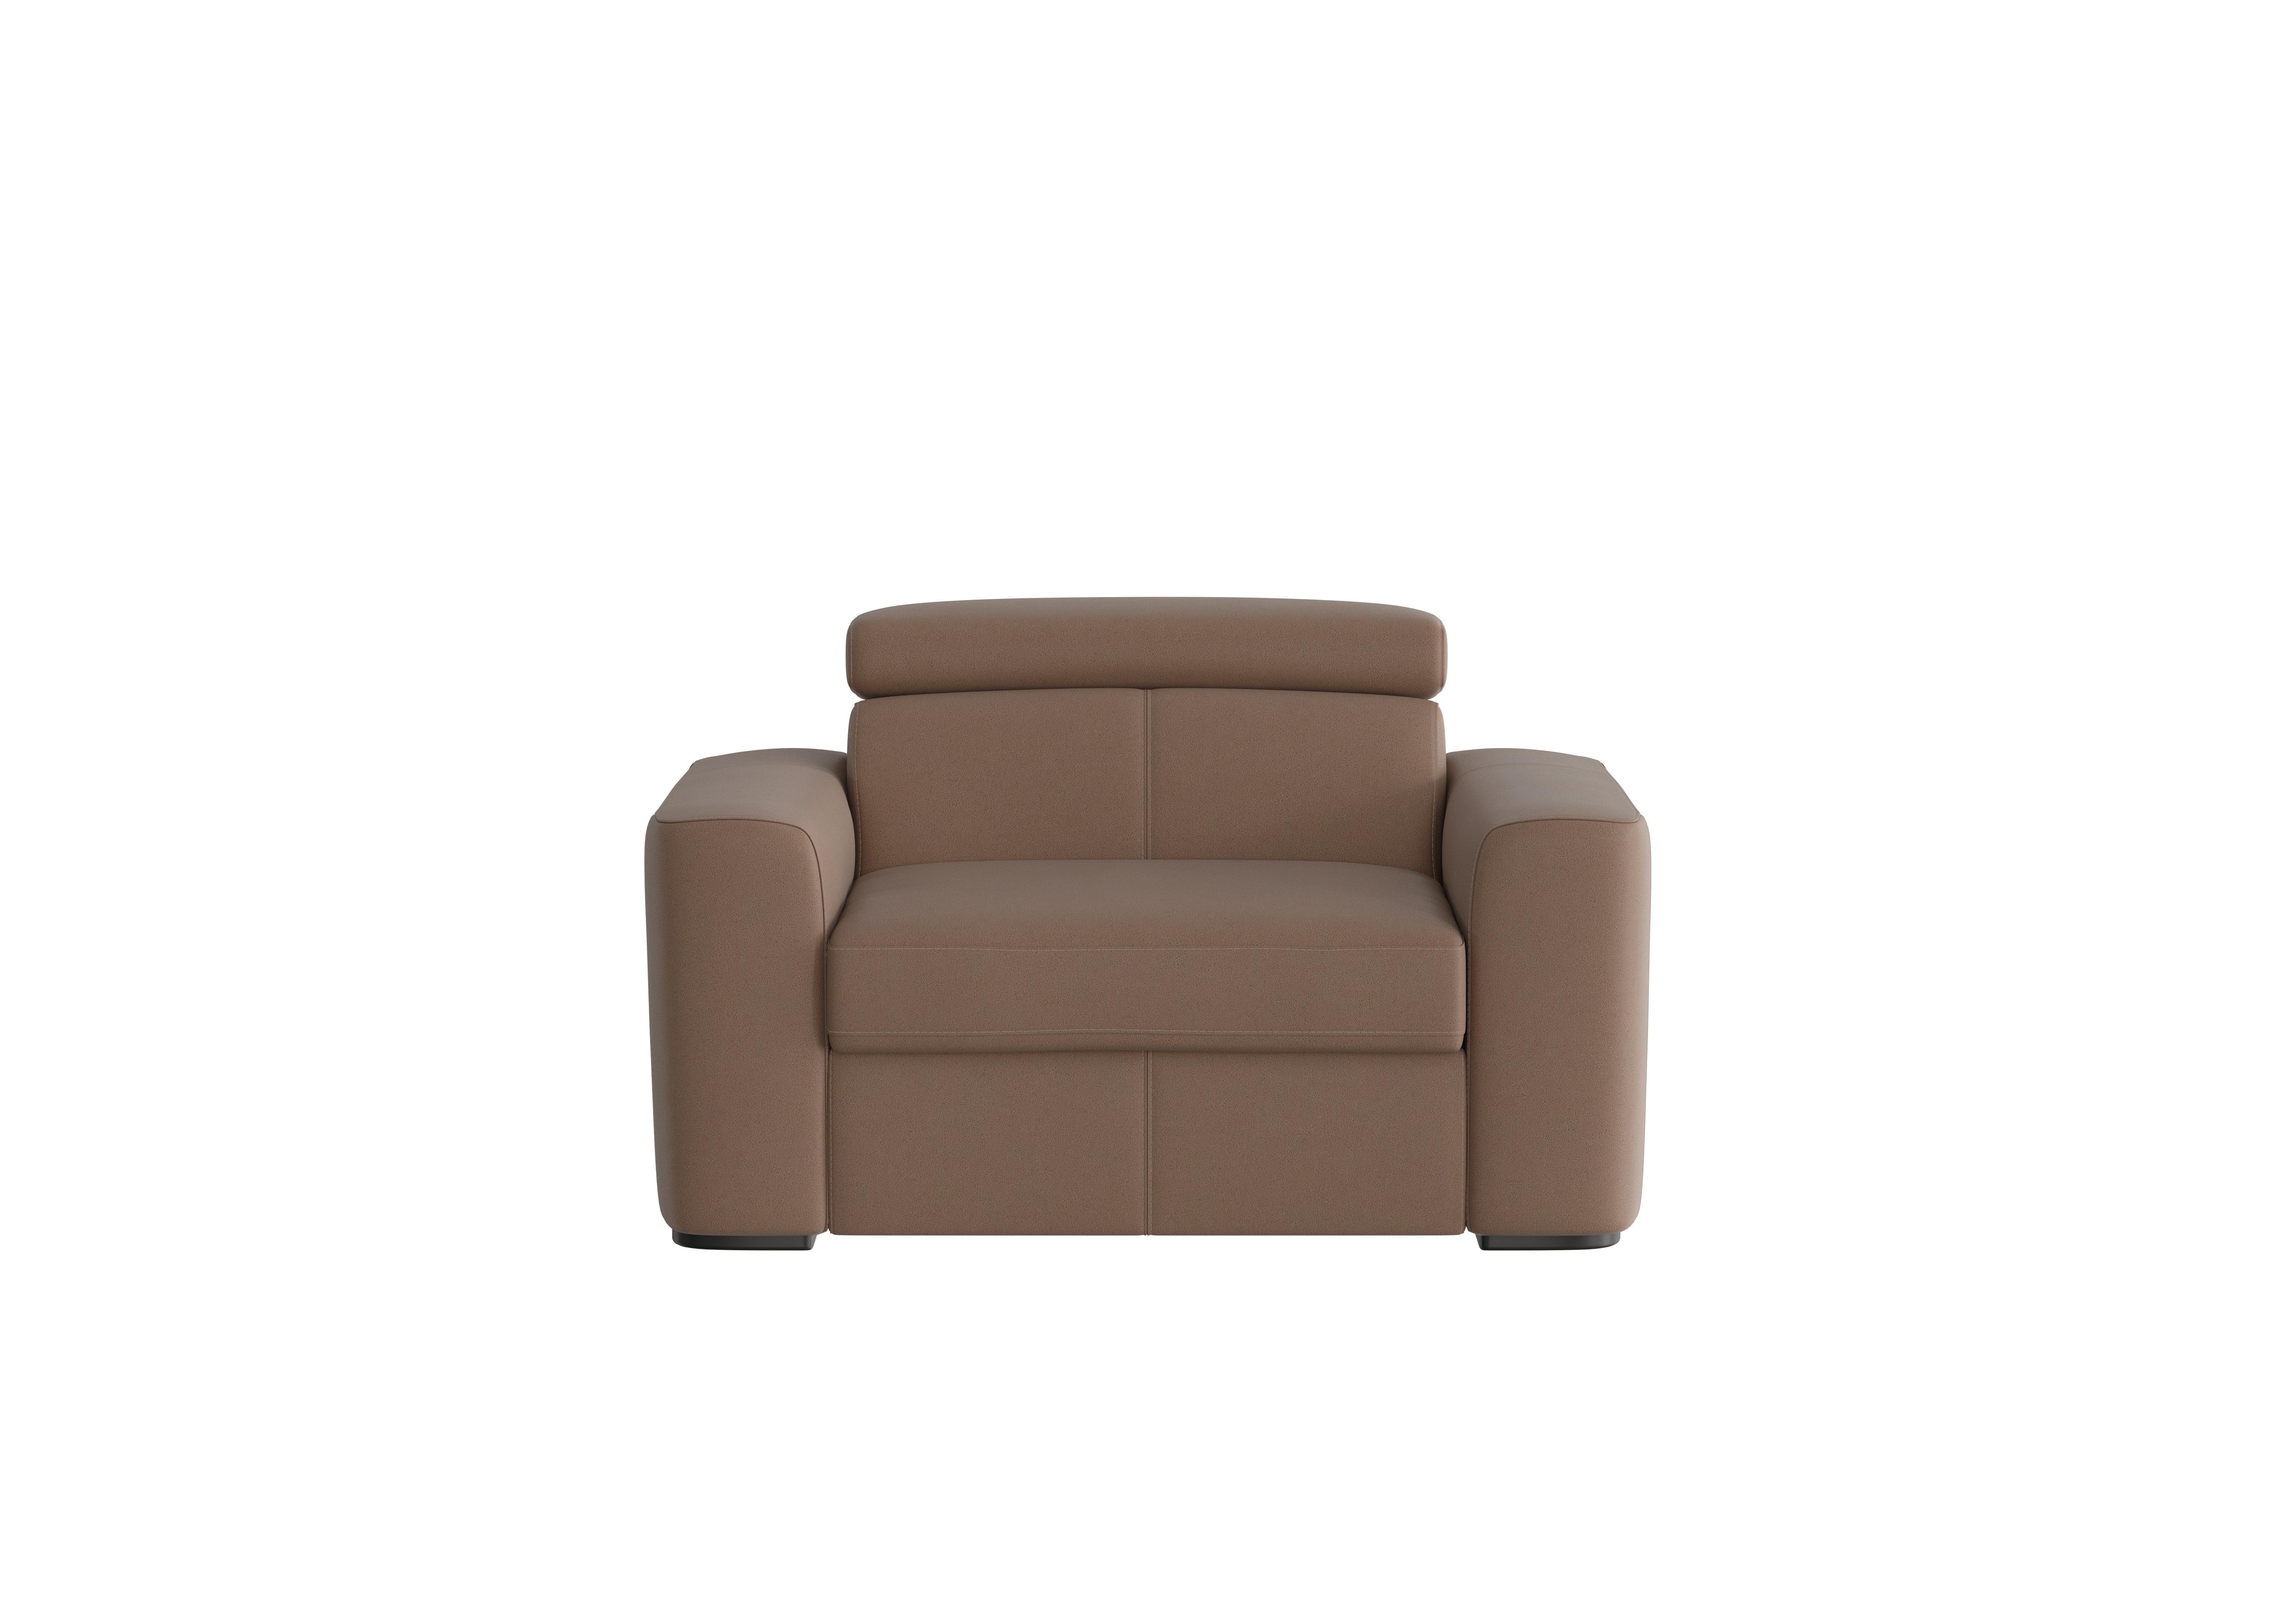 Infinity Fabric Chair Sofa Bed in Bfa-Blj-R04 Tobacco on Furniture Village